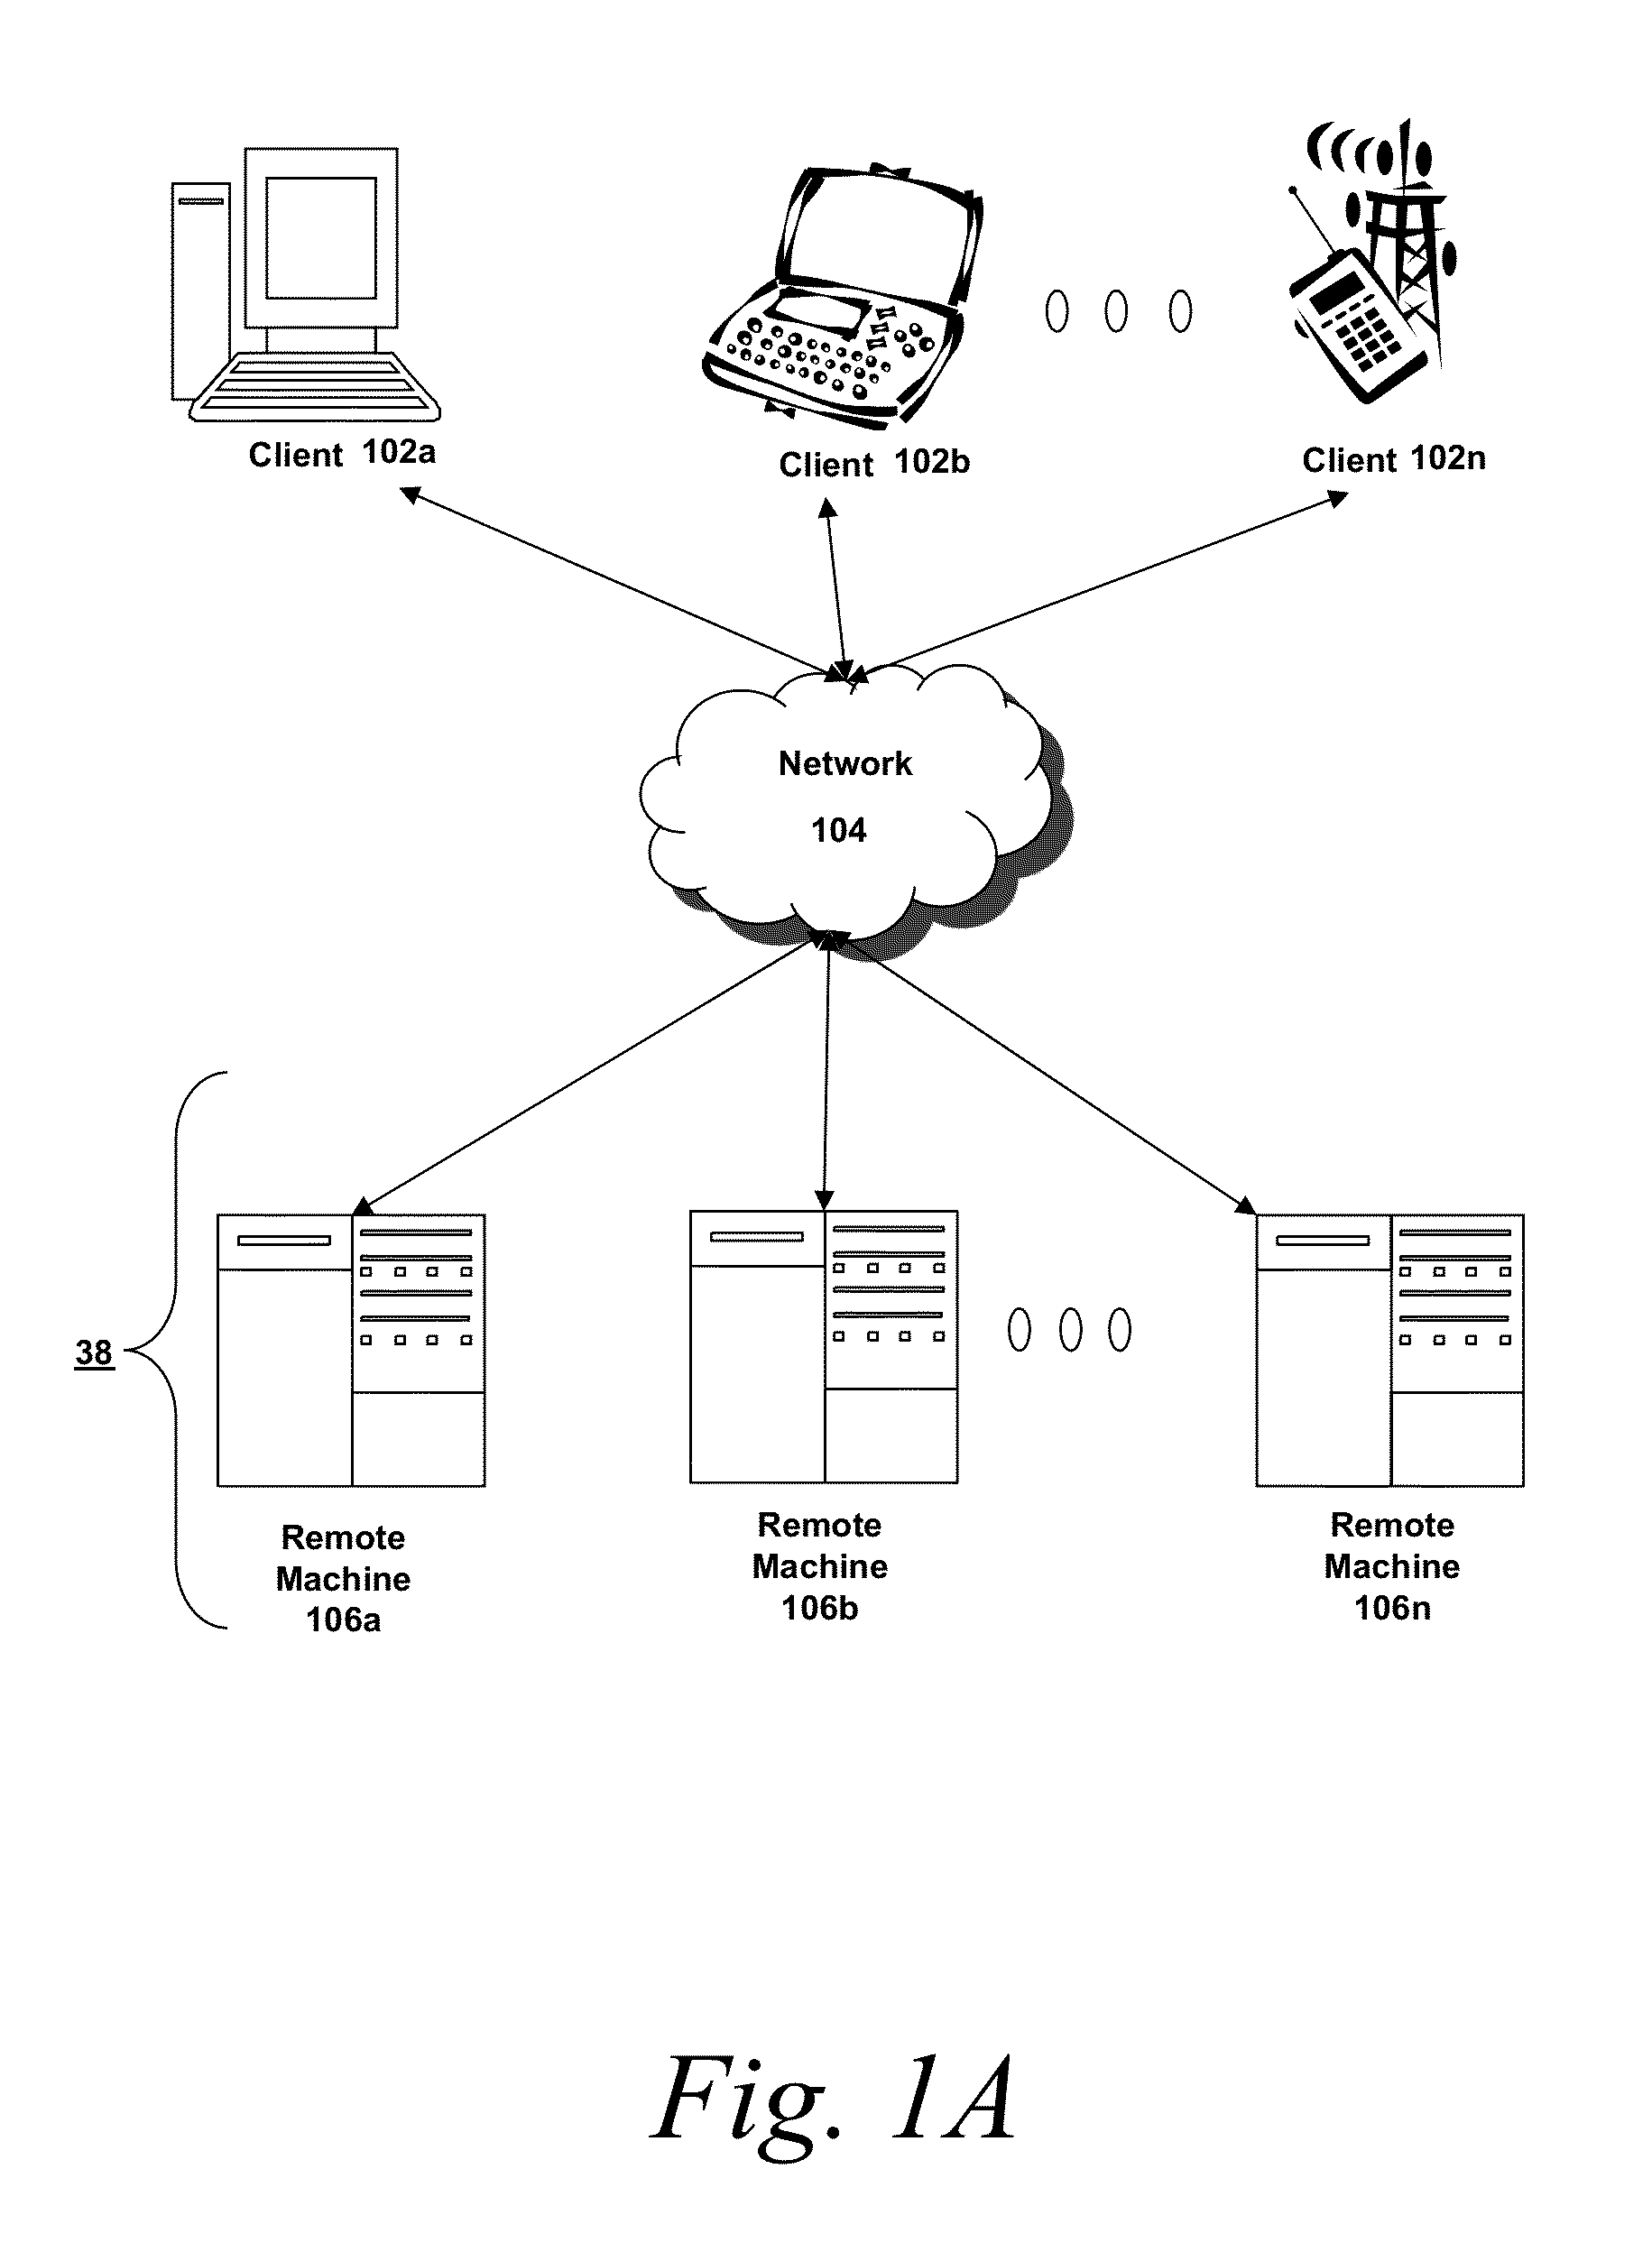 Methods and systems for providing, by a referral management system, dynamic scheduling of profiled professionals